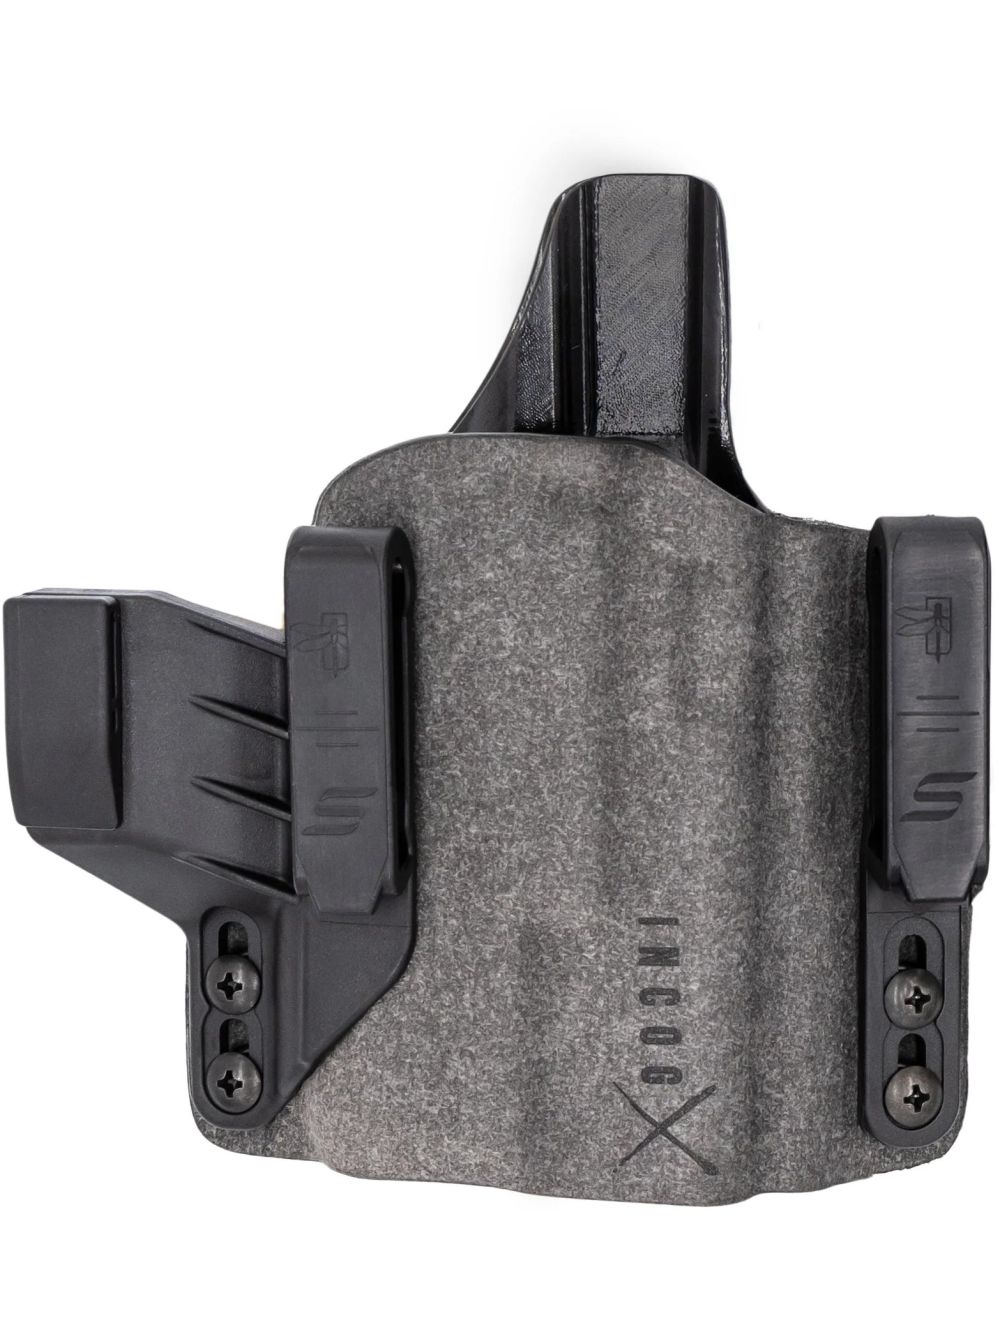 IncogX IWB Holster for Sig Sauer P365 w/ Light